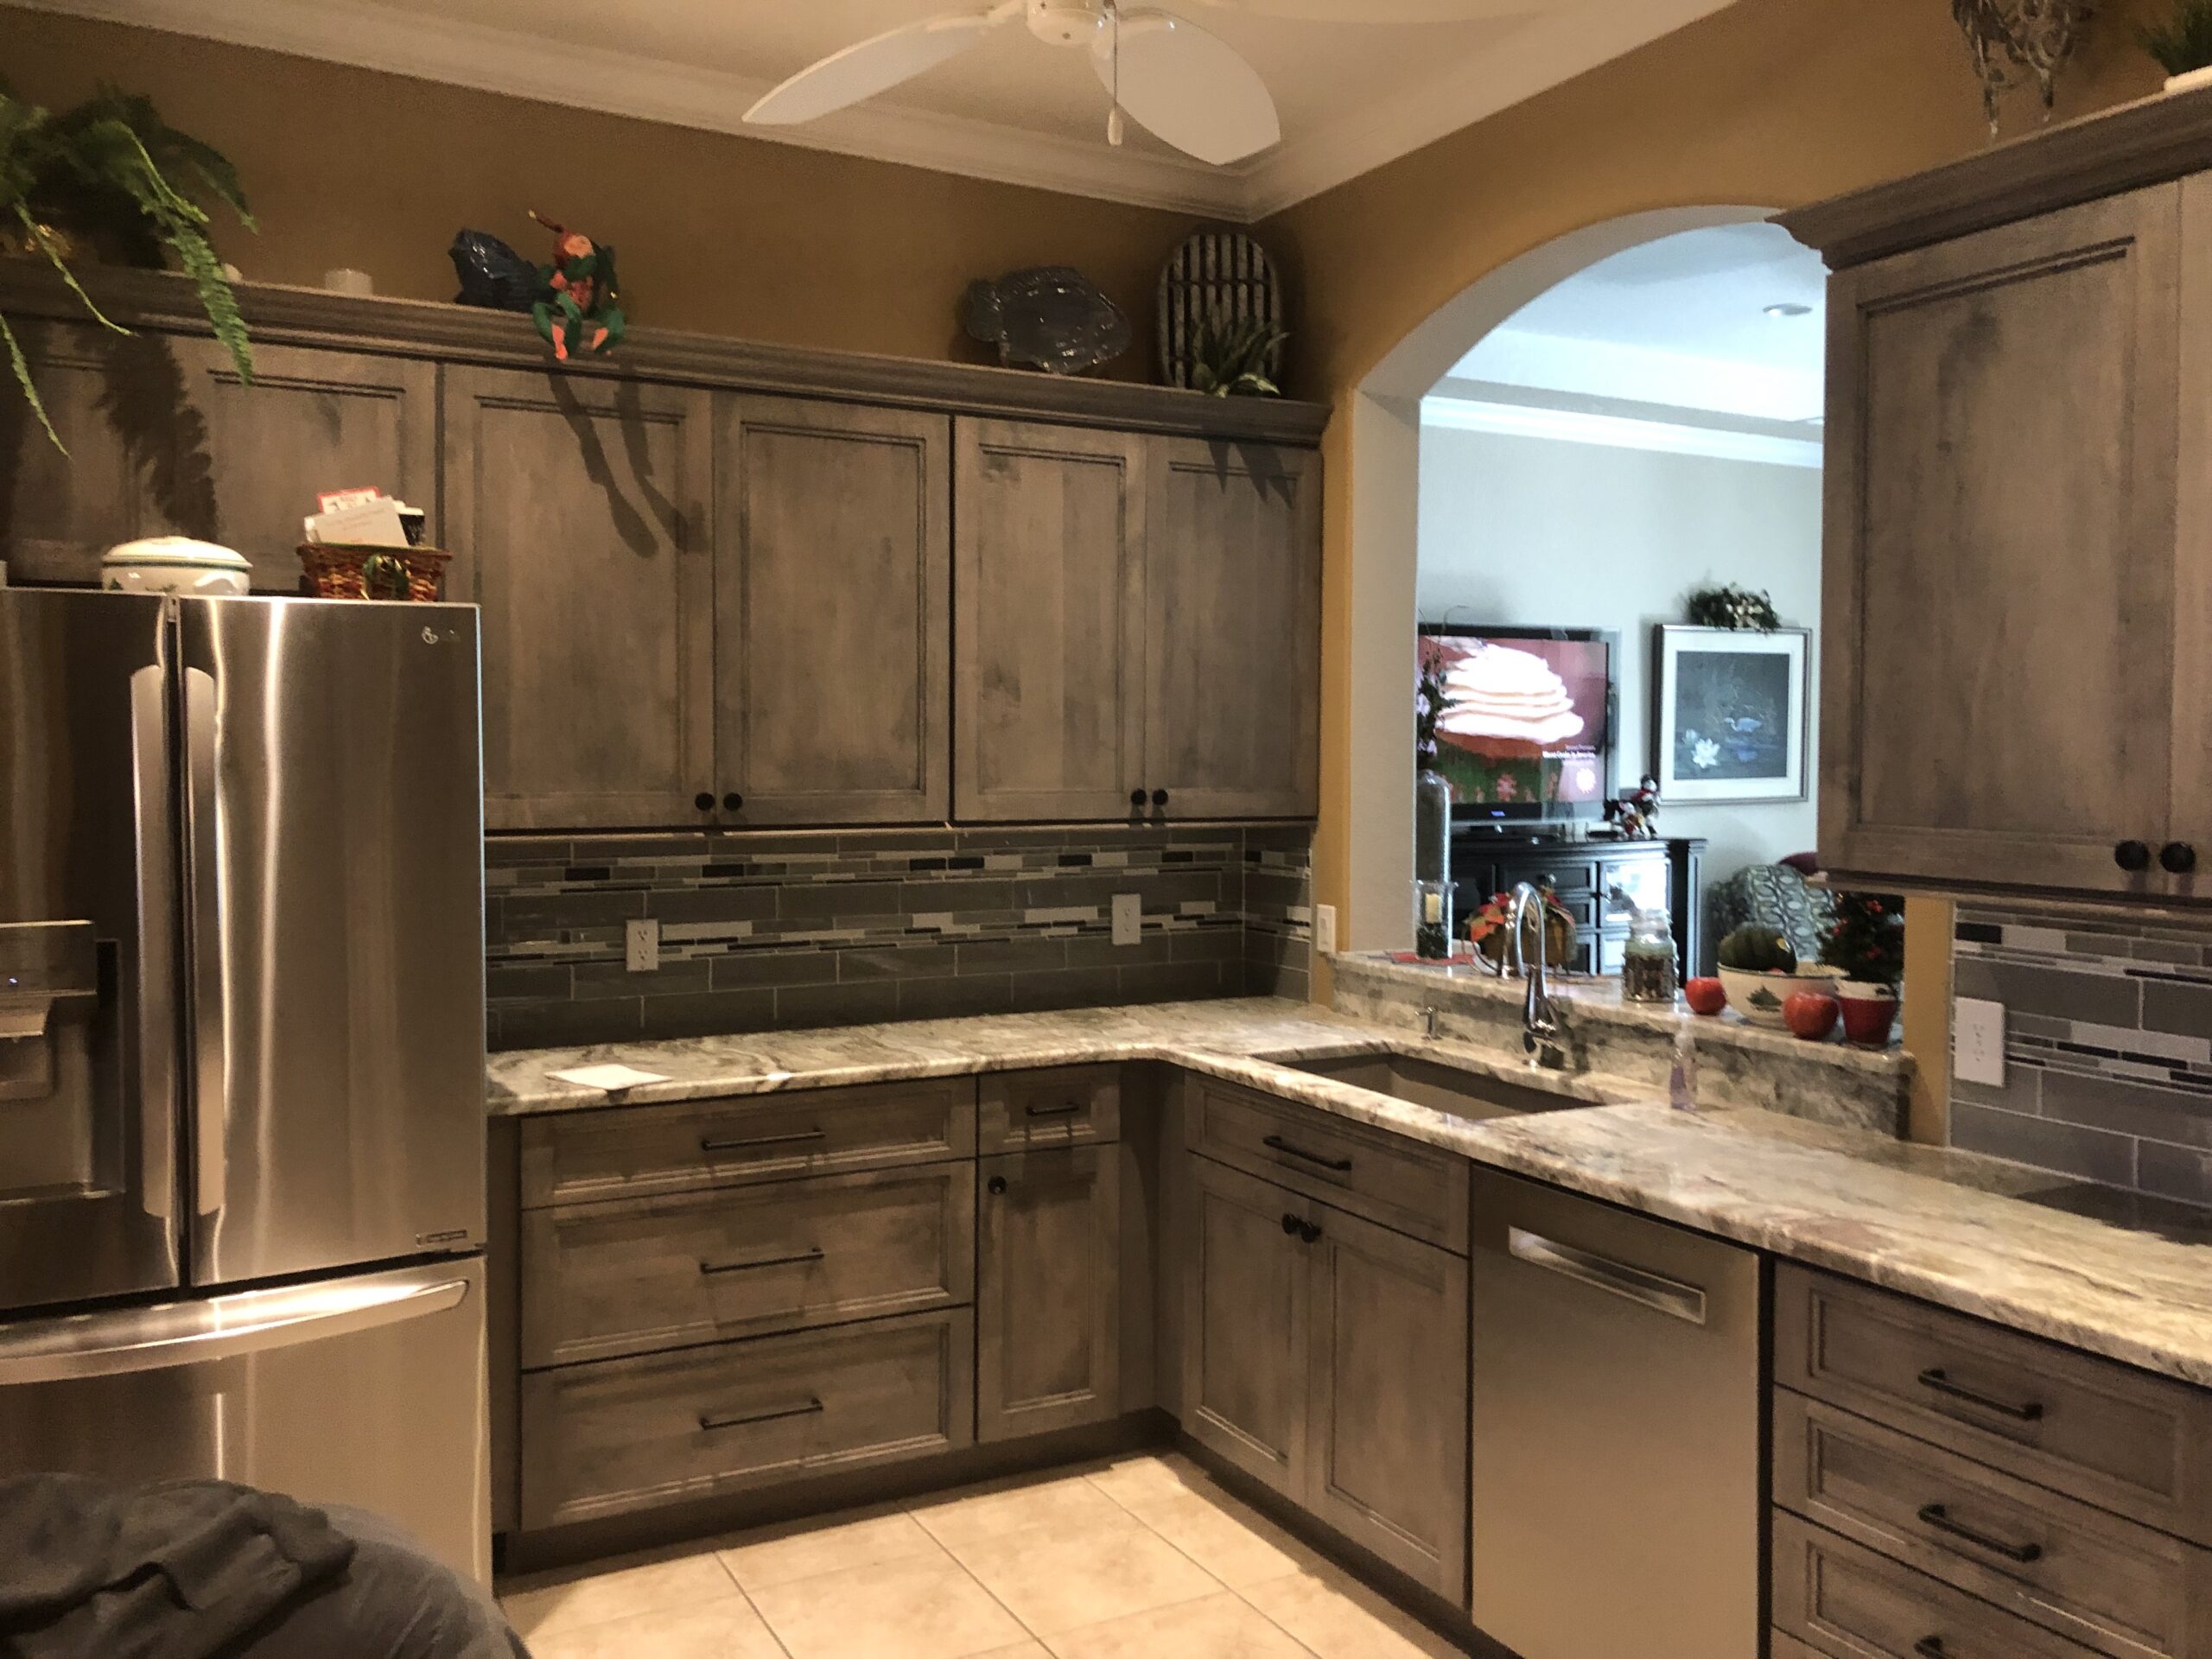 Modern, Stylish, and High Quality Stained Cherry Kitchen Cabinet Refacing in South Pasadena